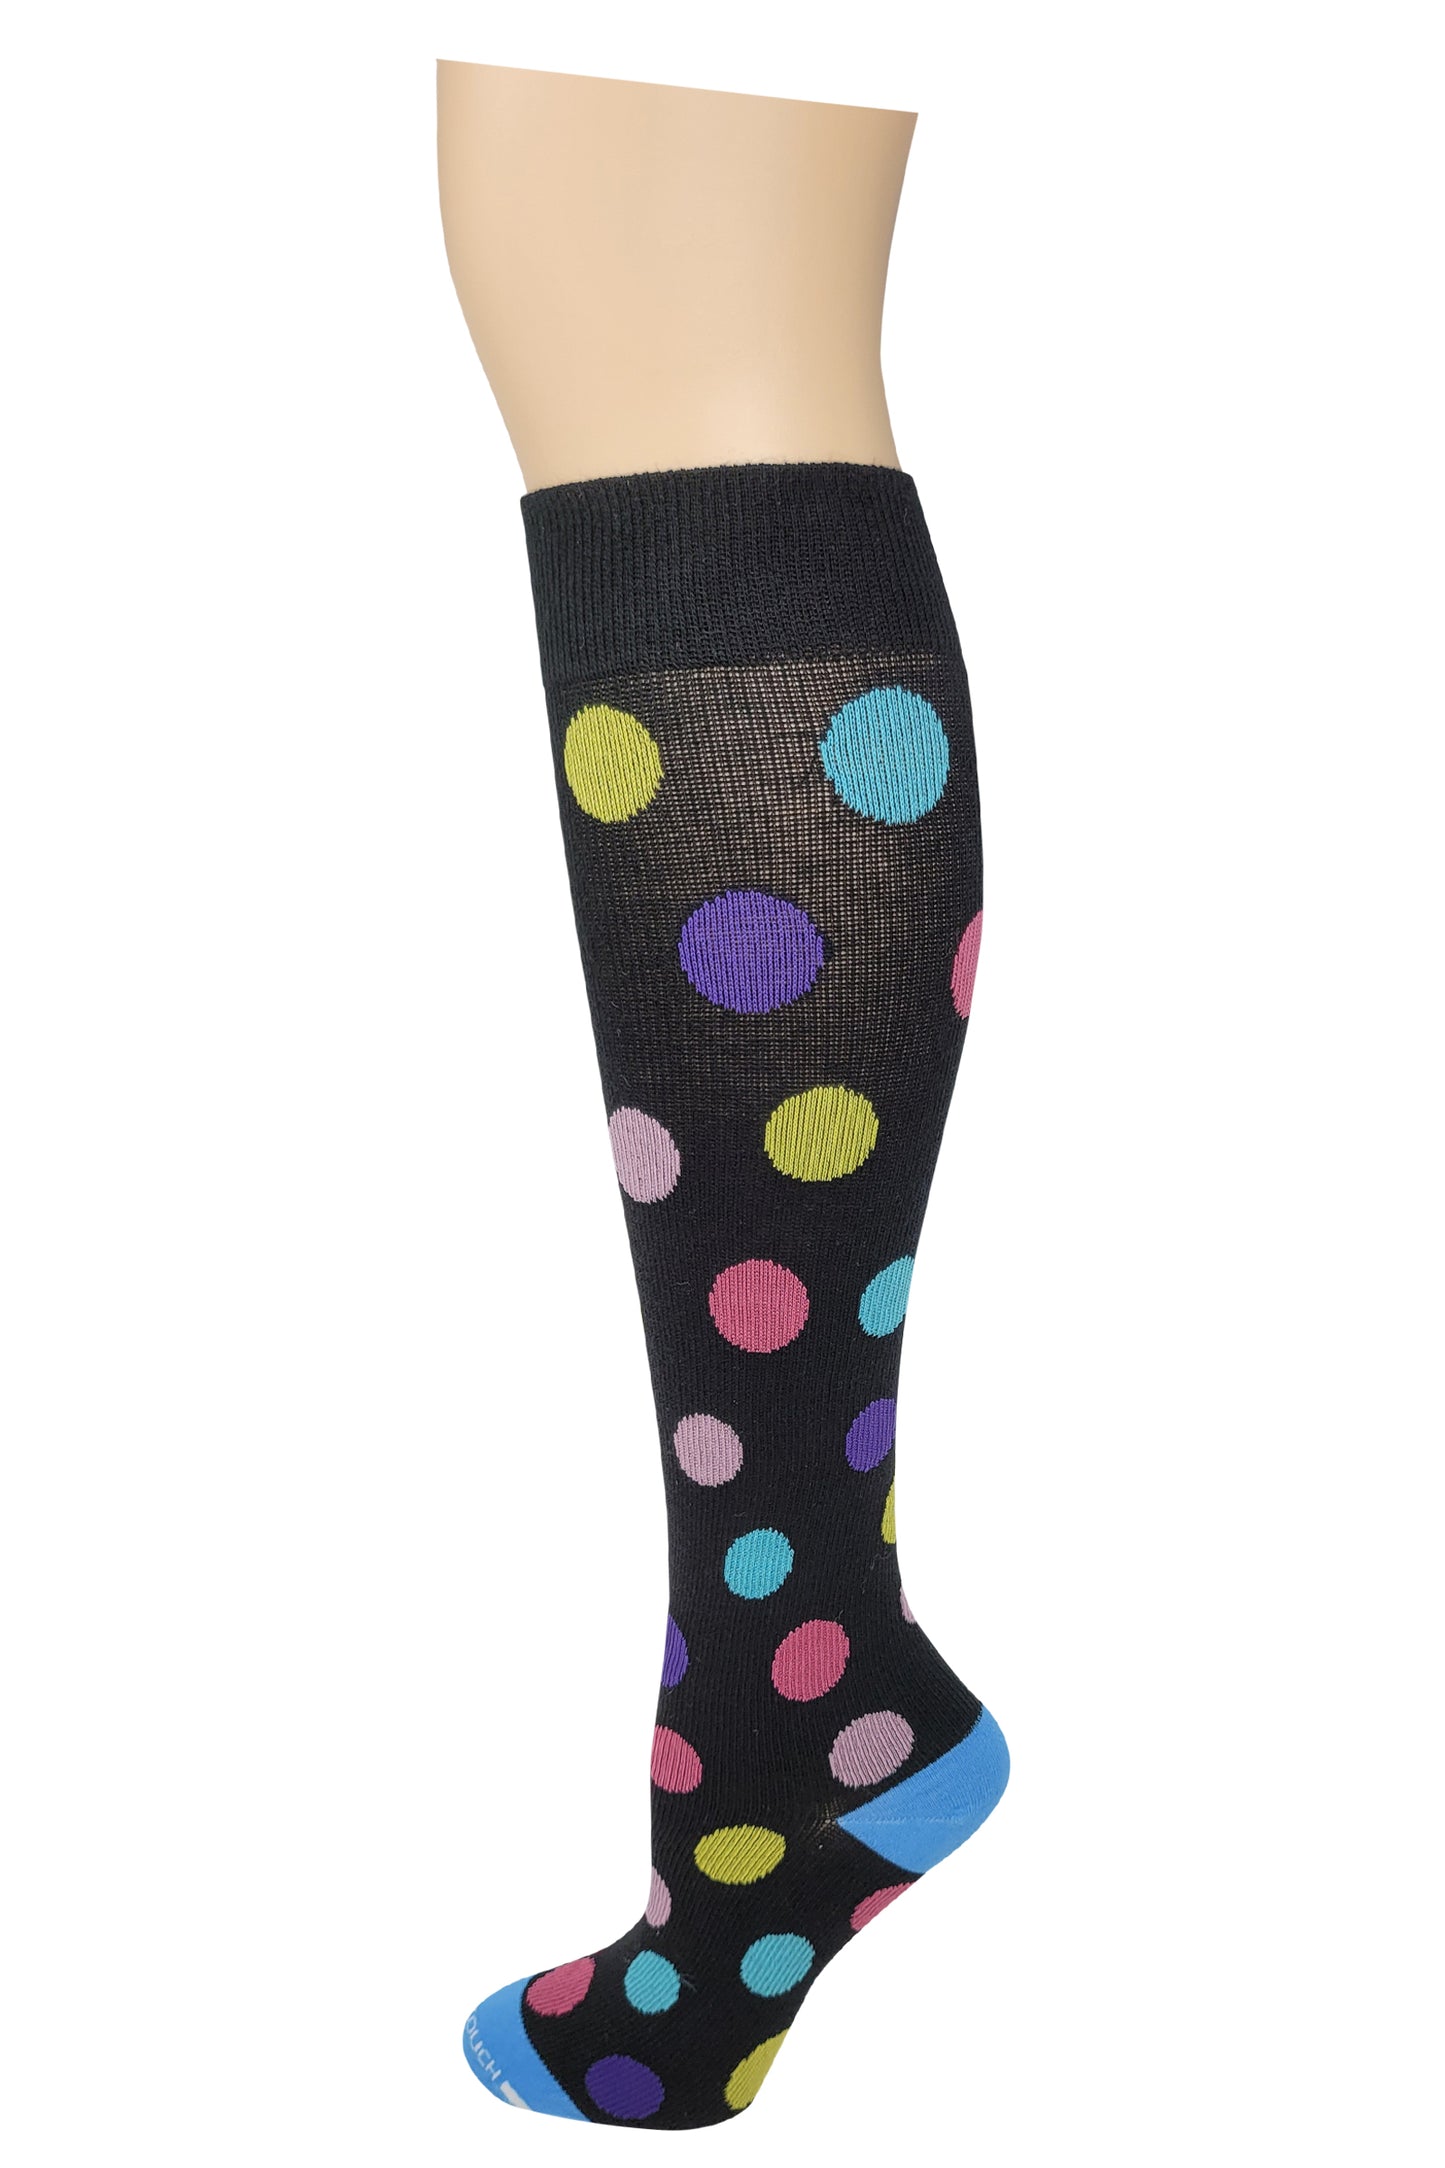 Compression Knee High Socks | Colorful Dots Design | Women (1 Pair)